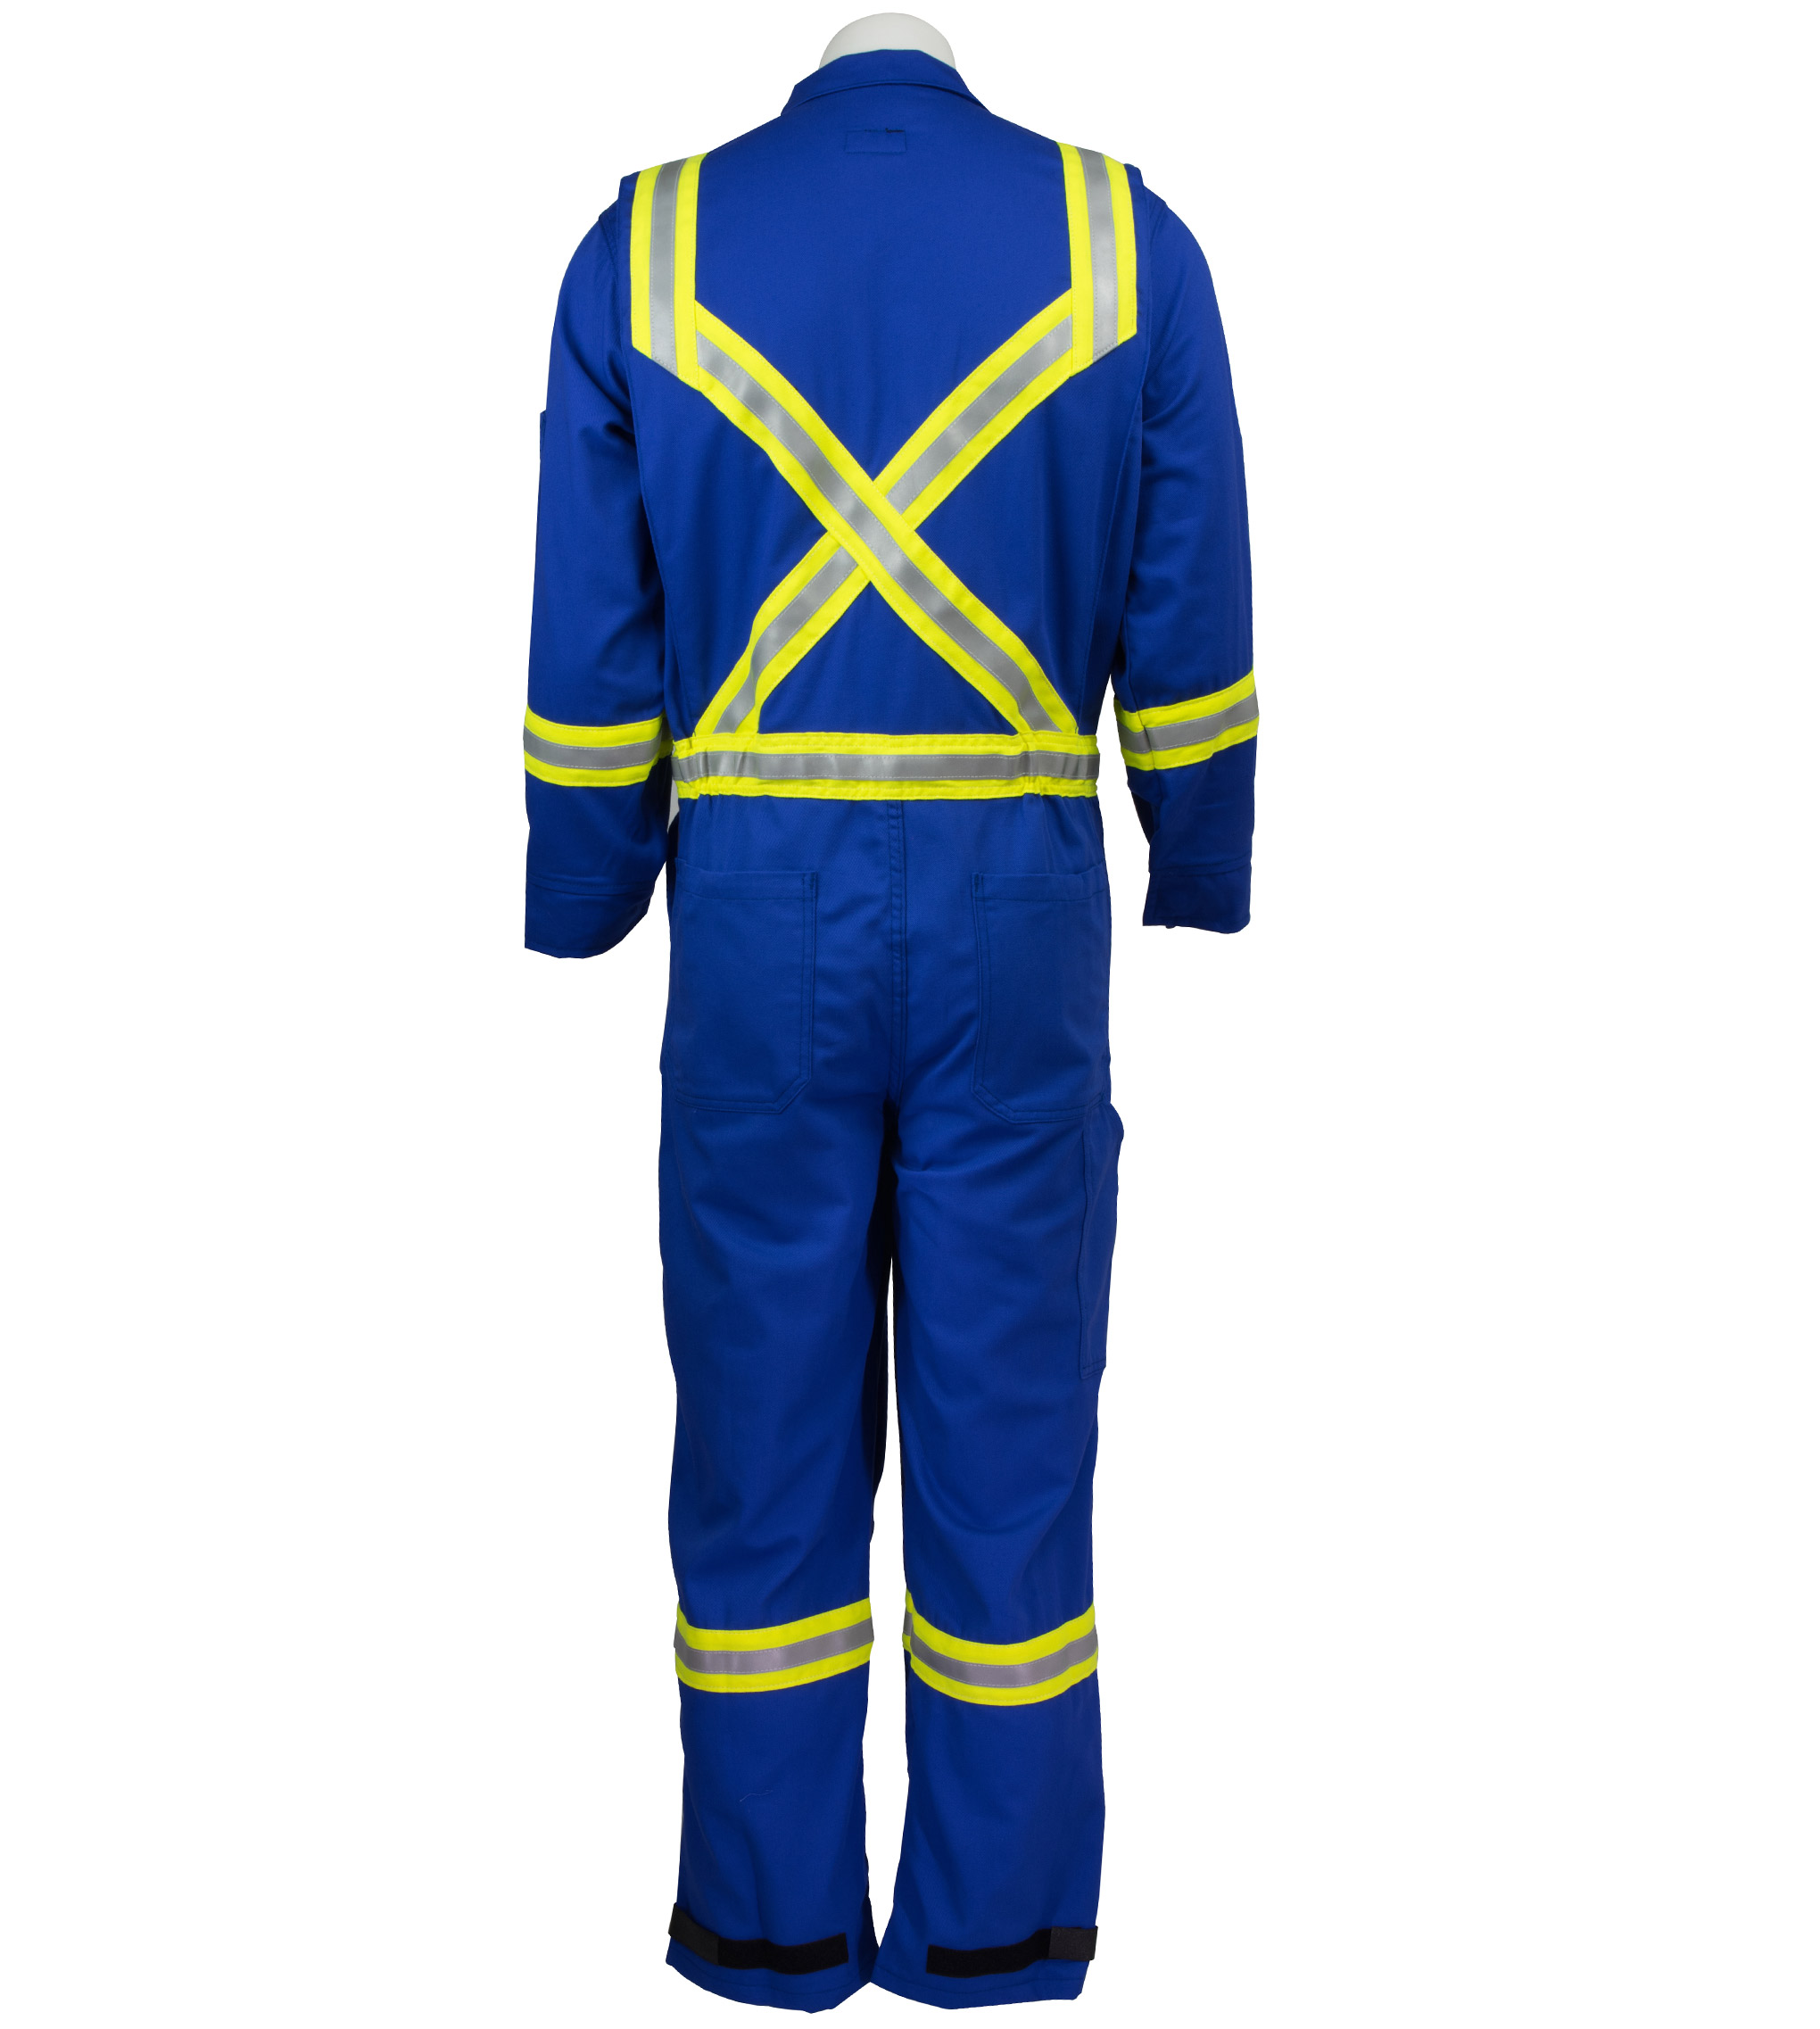 9oz Premium Flame Resistant Coverall in Royal Blue - Other Colours Available Upon Custom Order